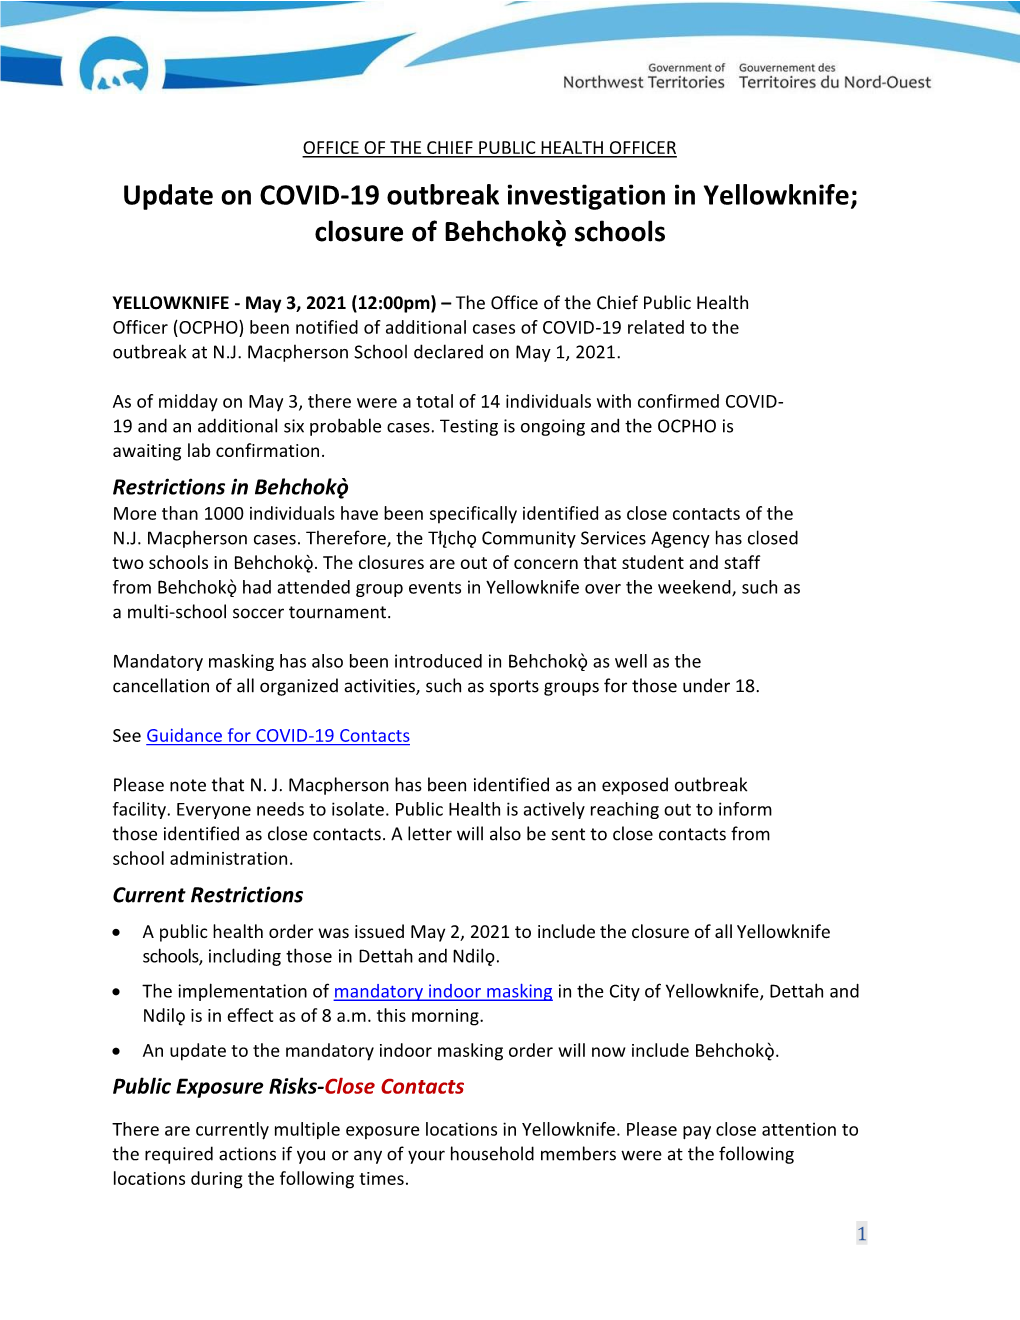 Update on COVID-19 Outbreak Investigation in Yellowknife; Closure of Behchokǫ̀ Schools